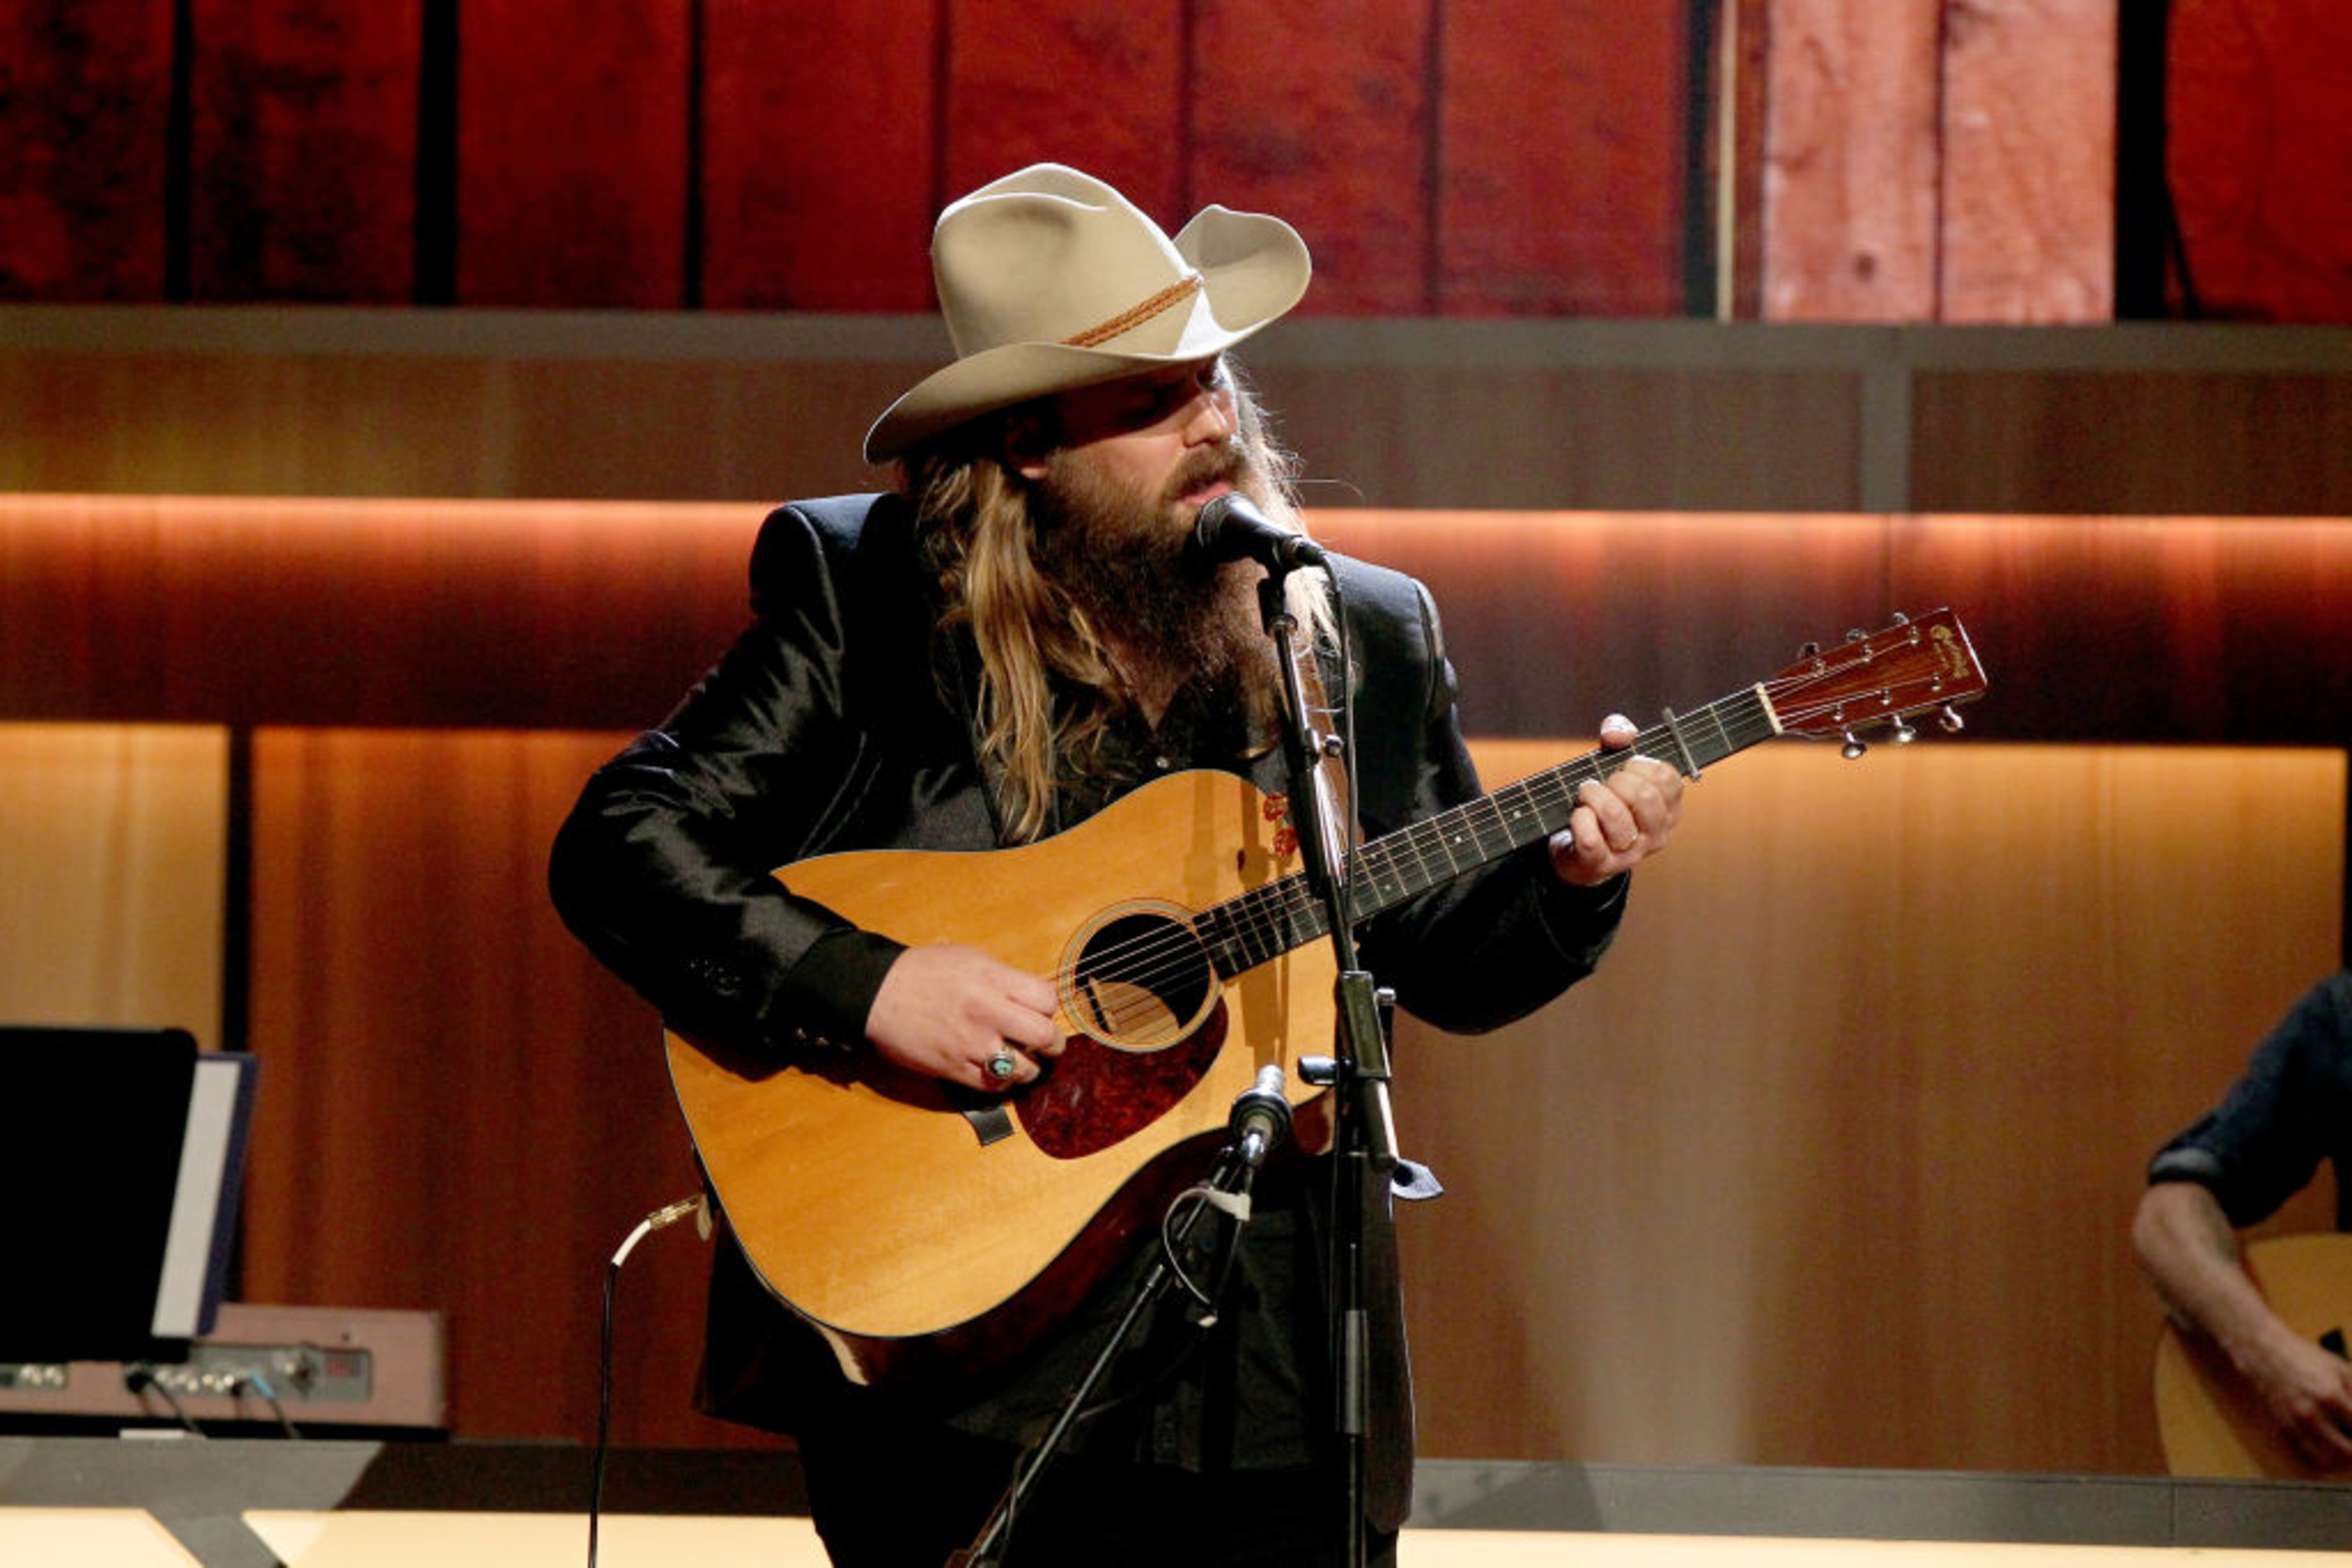 <p>"Traveller," the title track of Chris Stapleton's smash debut album, is a must for anyone who's got a heavy case of wanderlust. </p><p><a href='https://www.msn.com/en-us/community/channel/vid-cj9pqbr0vn9in2b6ddcd8sfgpfq6x6utp44fssrv6mc2gtybw0us'>Follow us on MSN to see more of our exclusive entertainment content.</a></p>